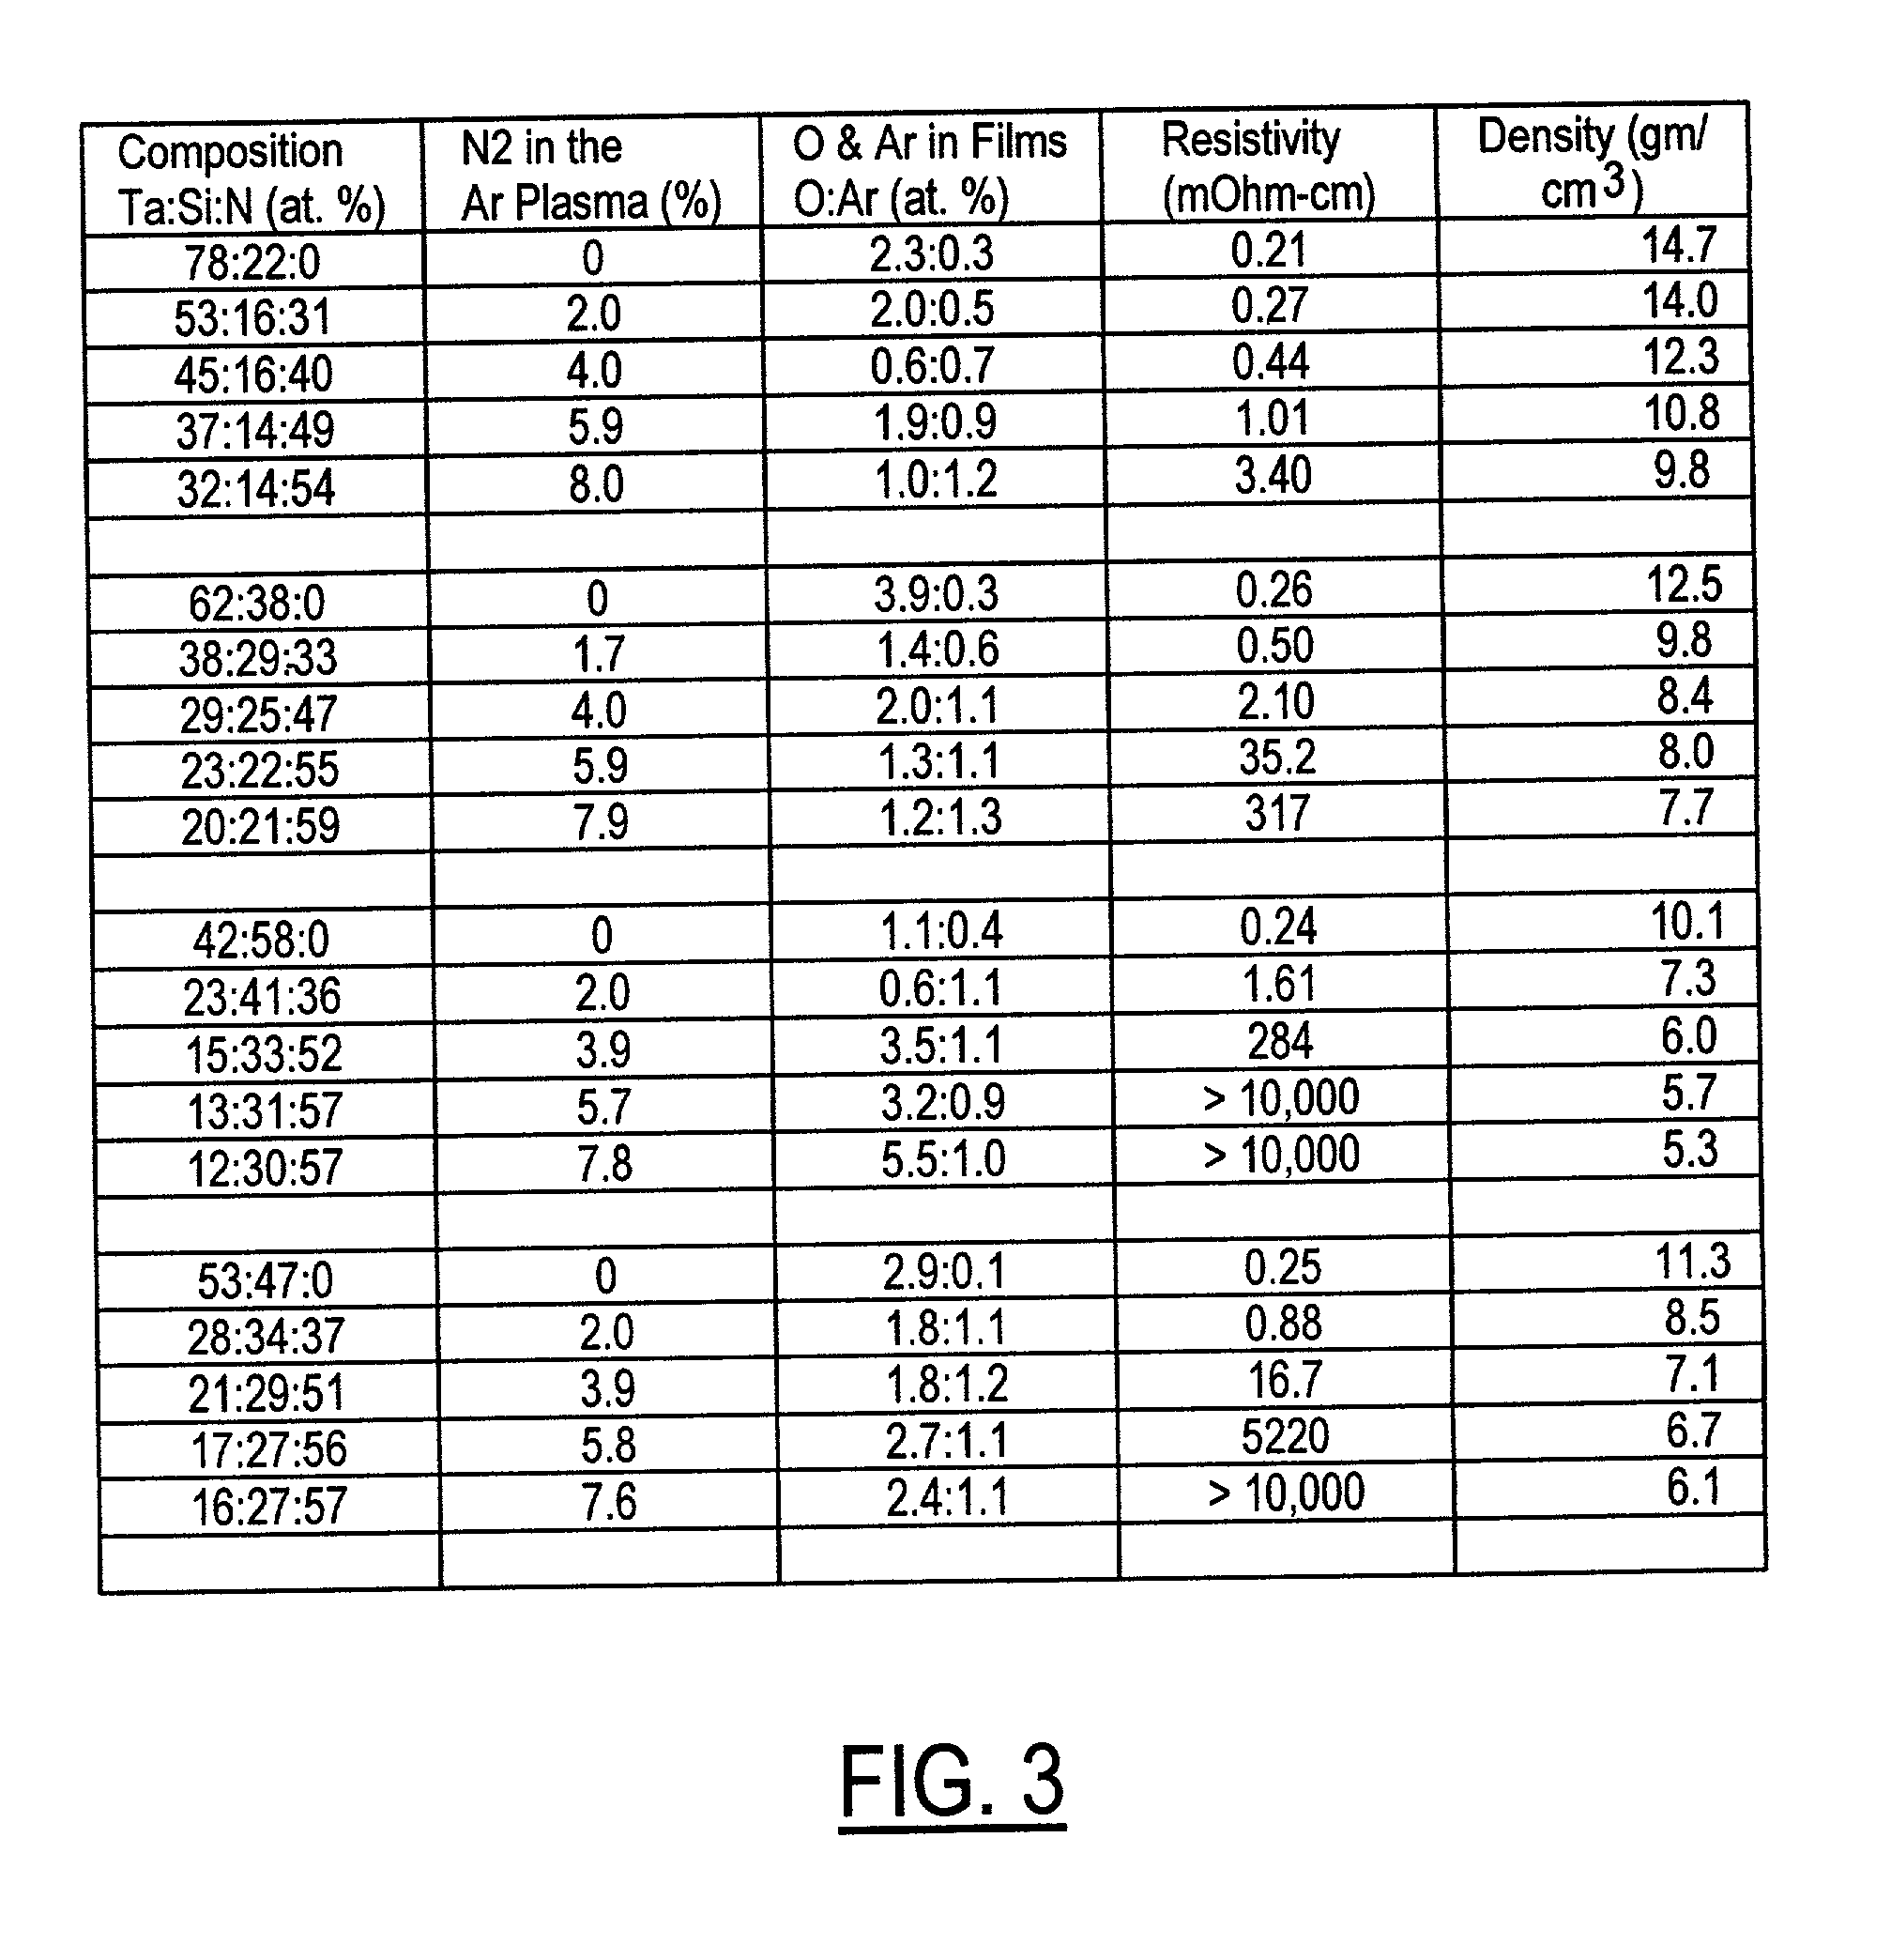 Method for fabricating ultra high-resistive conductors in semiconductor devices and devices fabricated